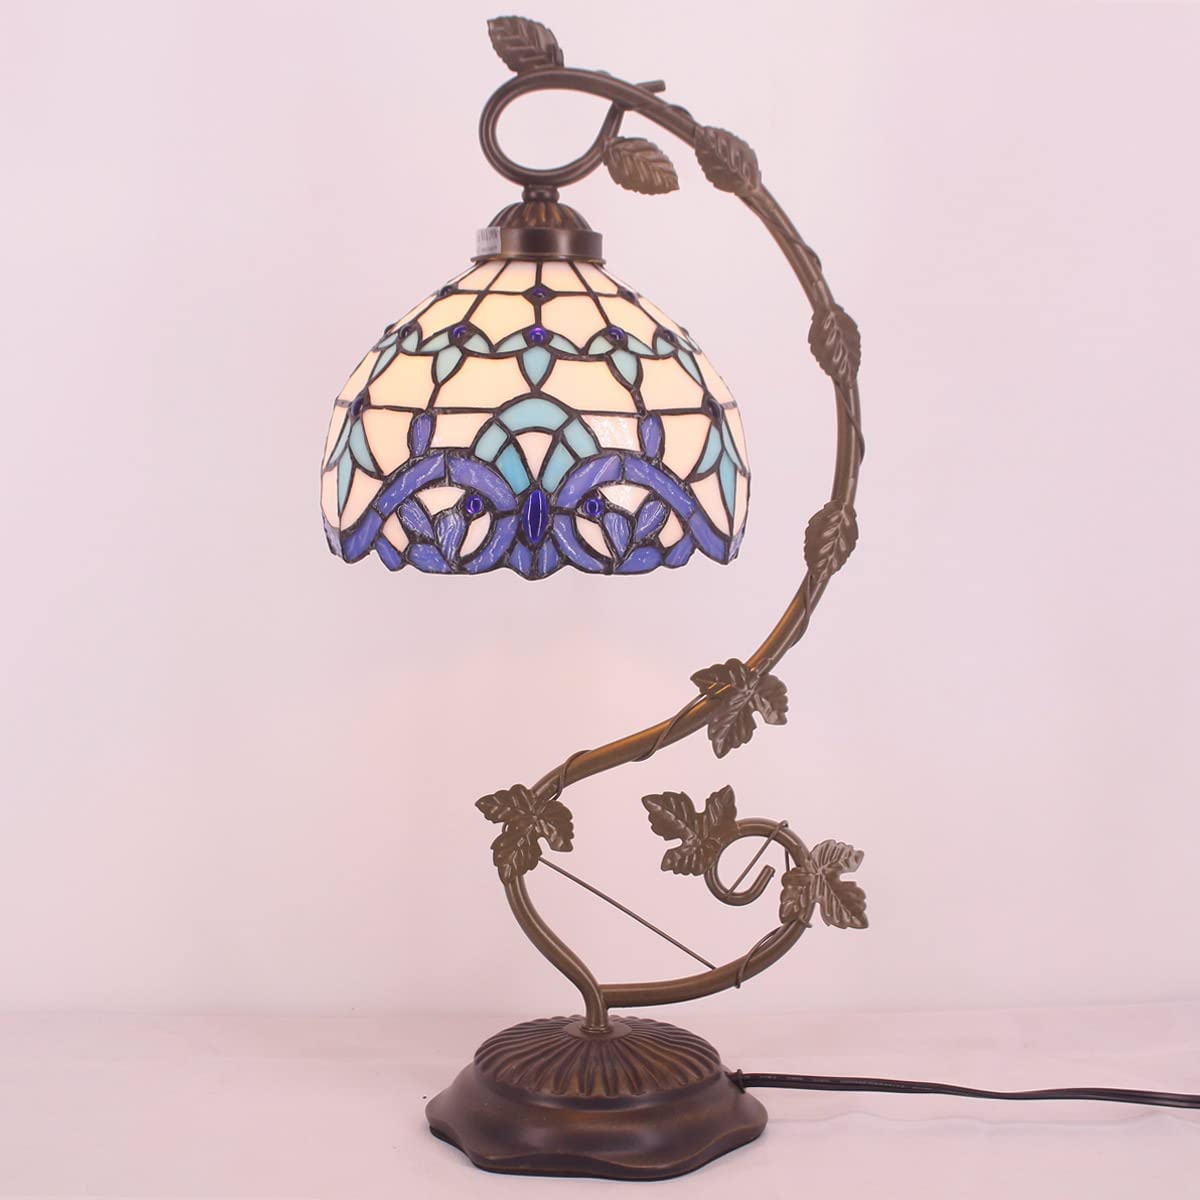 SHADY  Style Lamp White Blue Stained Glass Table Lamp Reading Desk Light Metal Leaf Base 8X10X21 Inches Decor Small Space Bedside Bedroom Home Office S003B Series